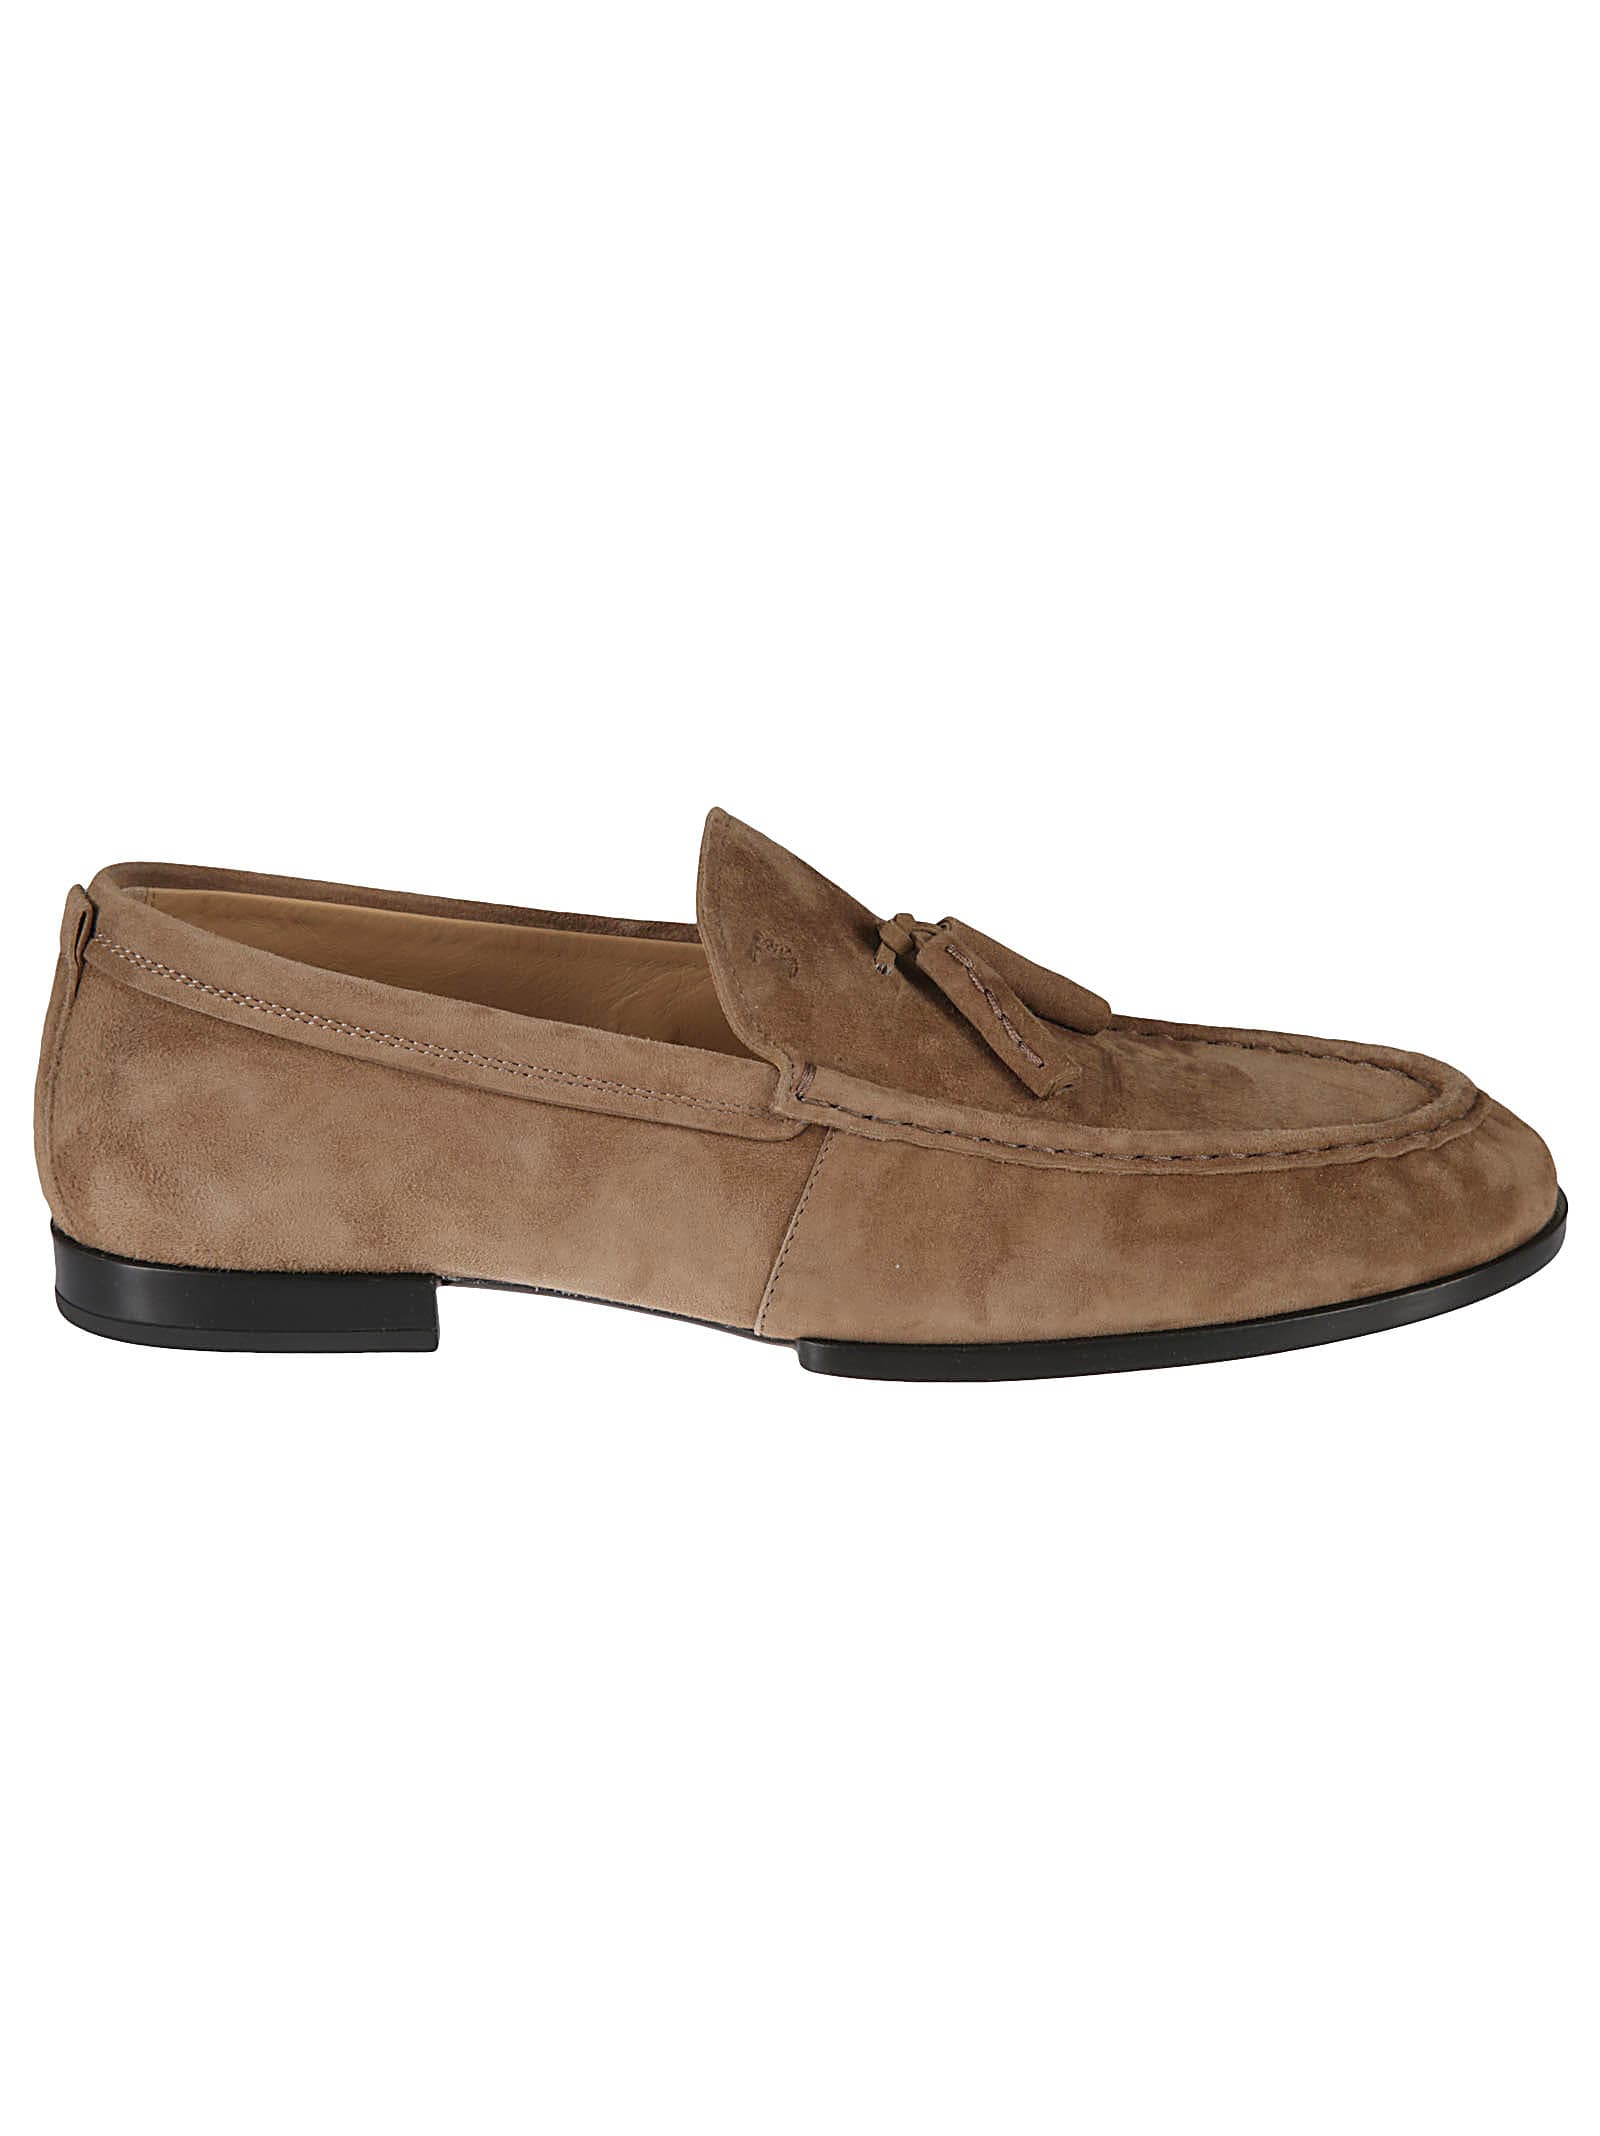 Tods Classic Logo Stamp Loafers